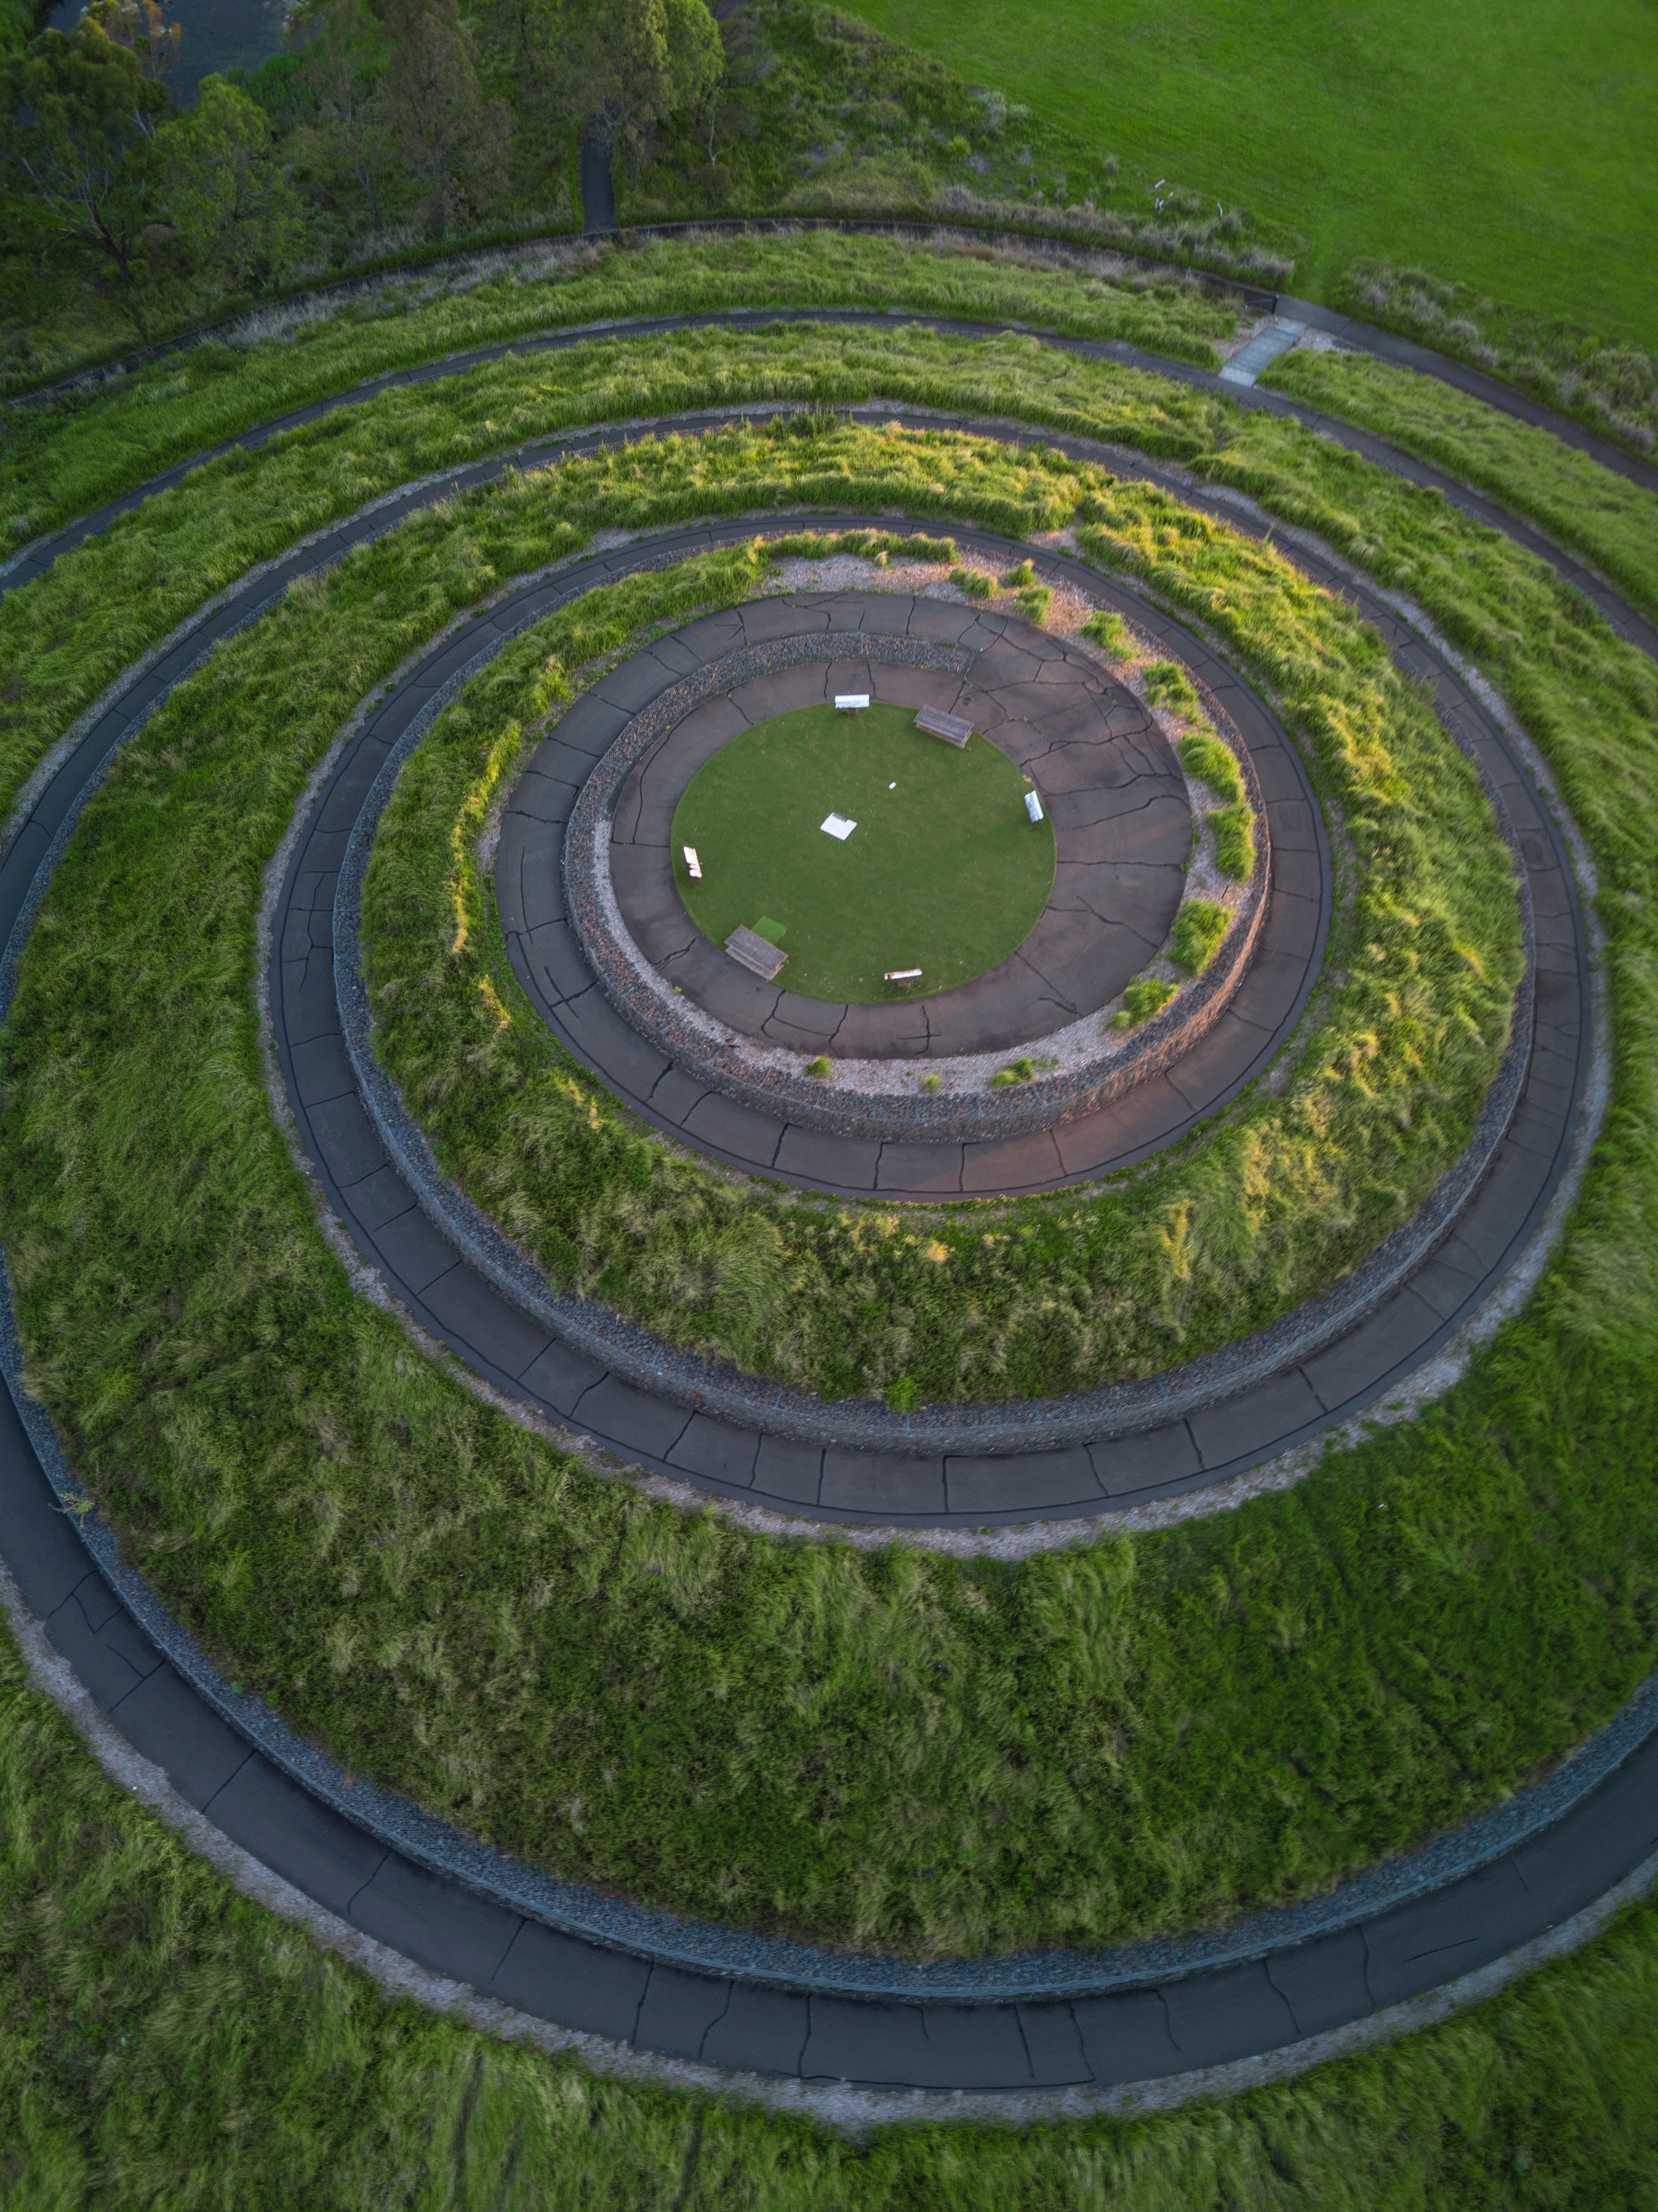 spiral, view from above, miscellanea, miscellaneous, greens, path, trail, maze, landscaping, landscape design cellphone